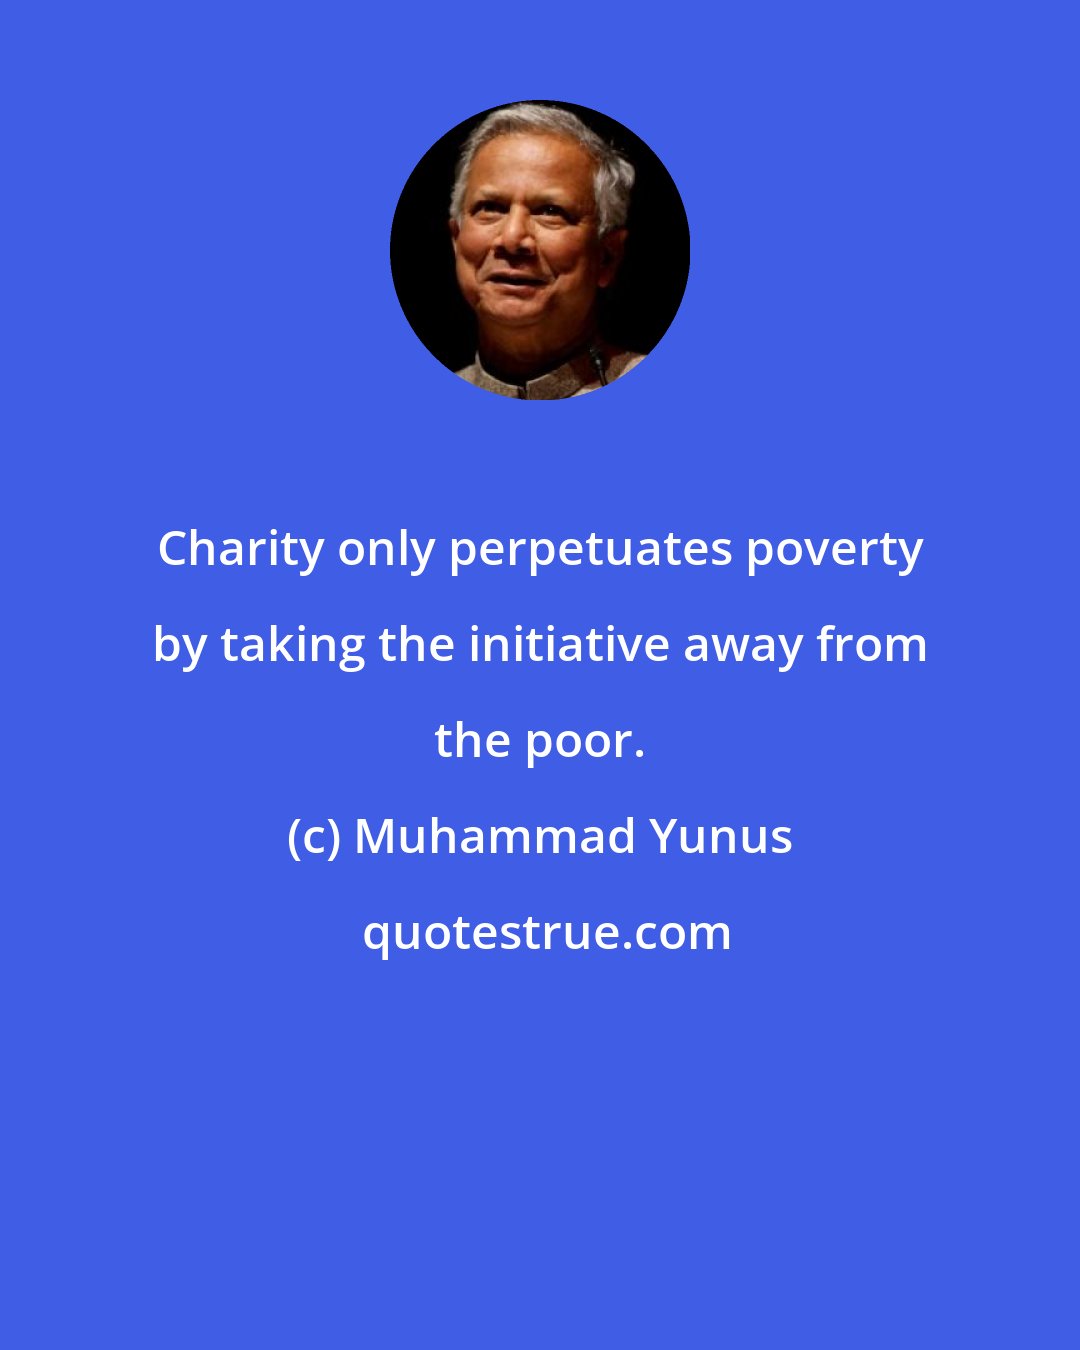 Muhammad Yunus: Charity only perpetuates poverty by taking the initiative away from the poor.